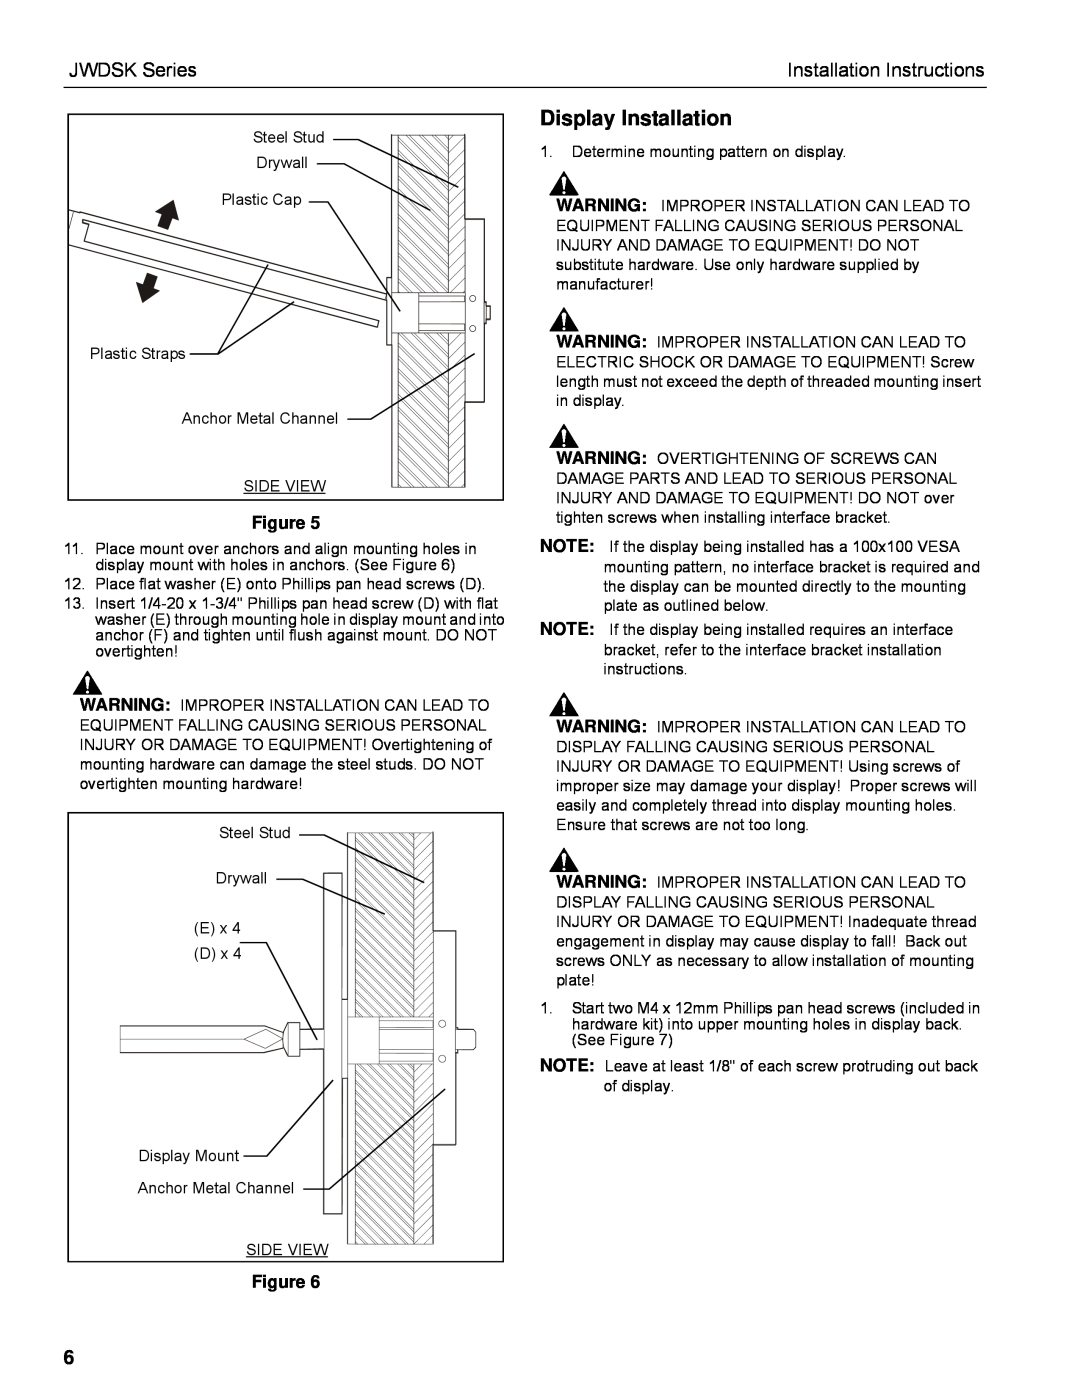 Chief Manufacturing installation instructions Display Installation, JWDSK Series, Installation Instructions 